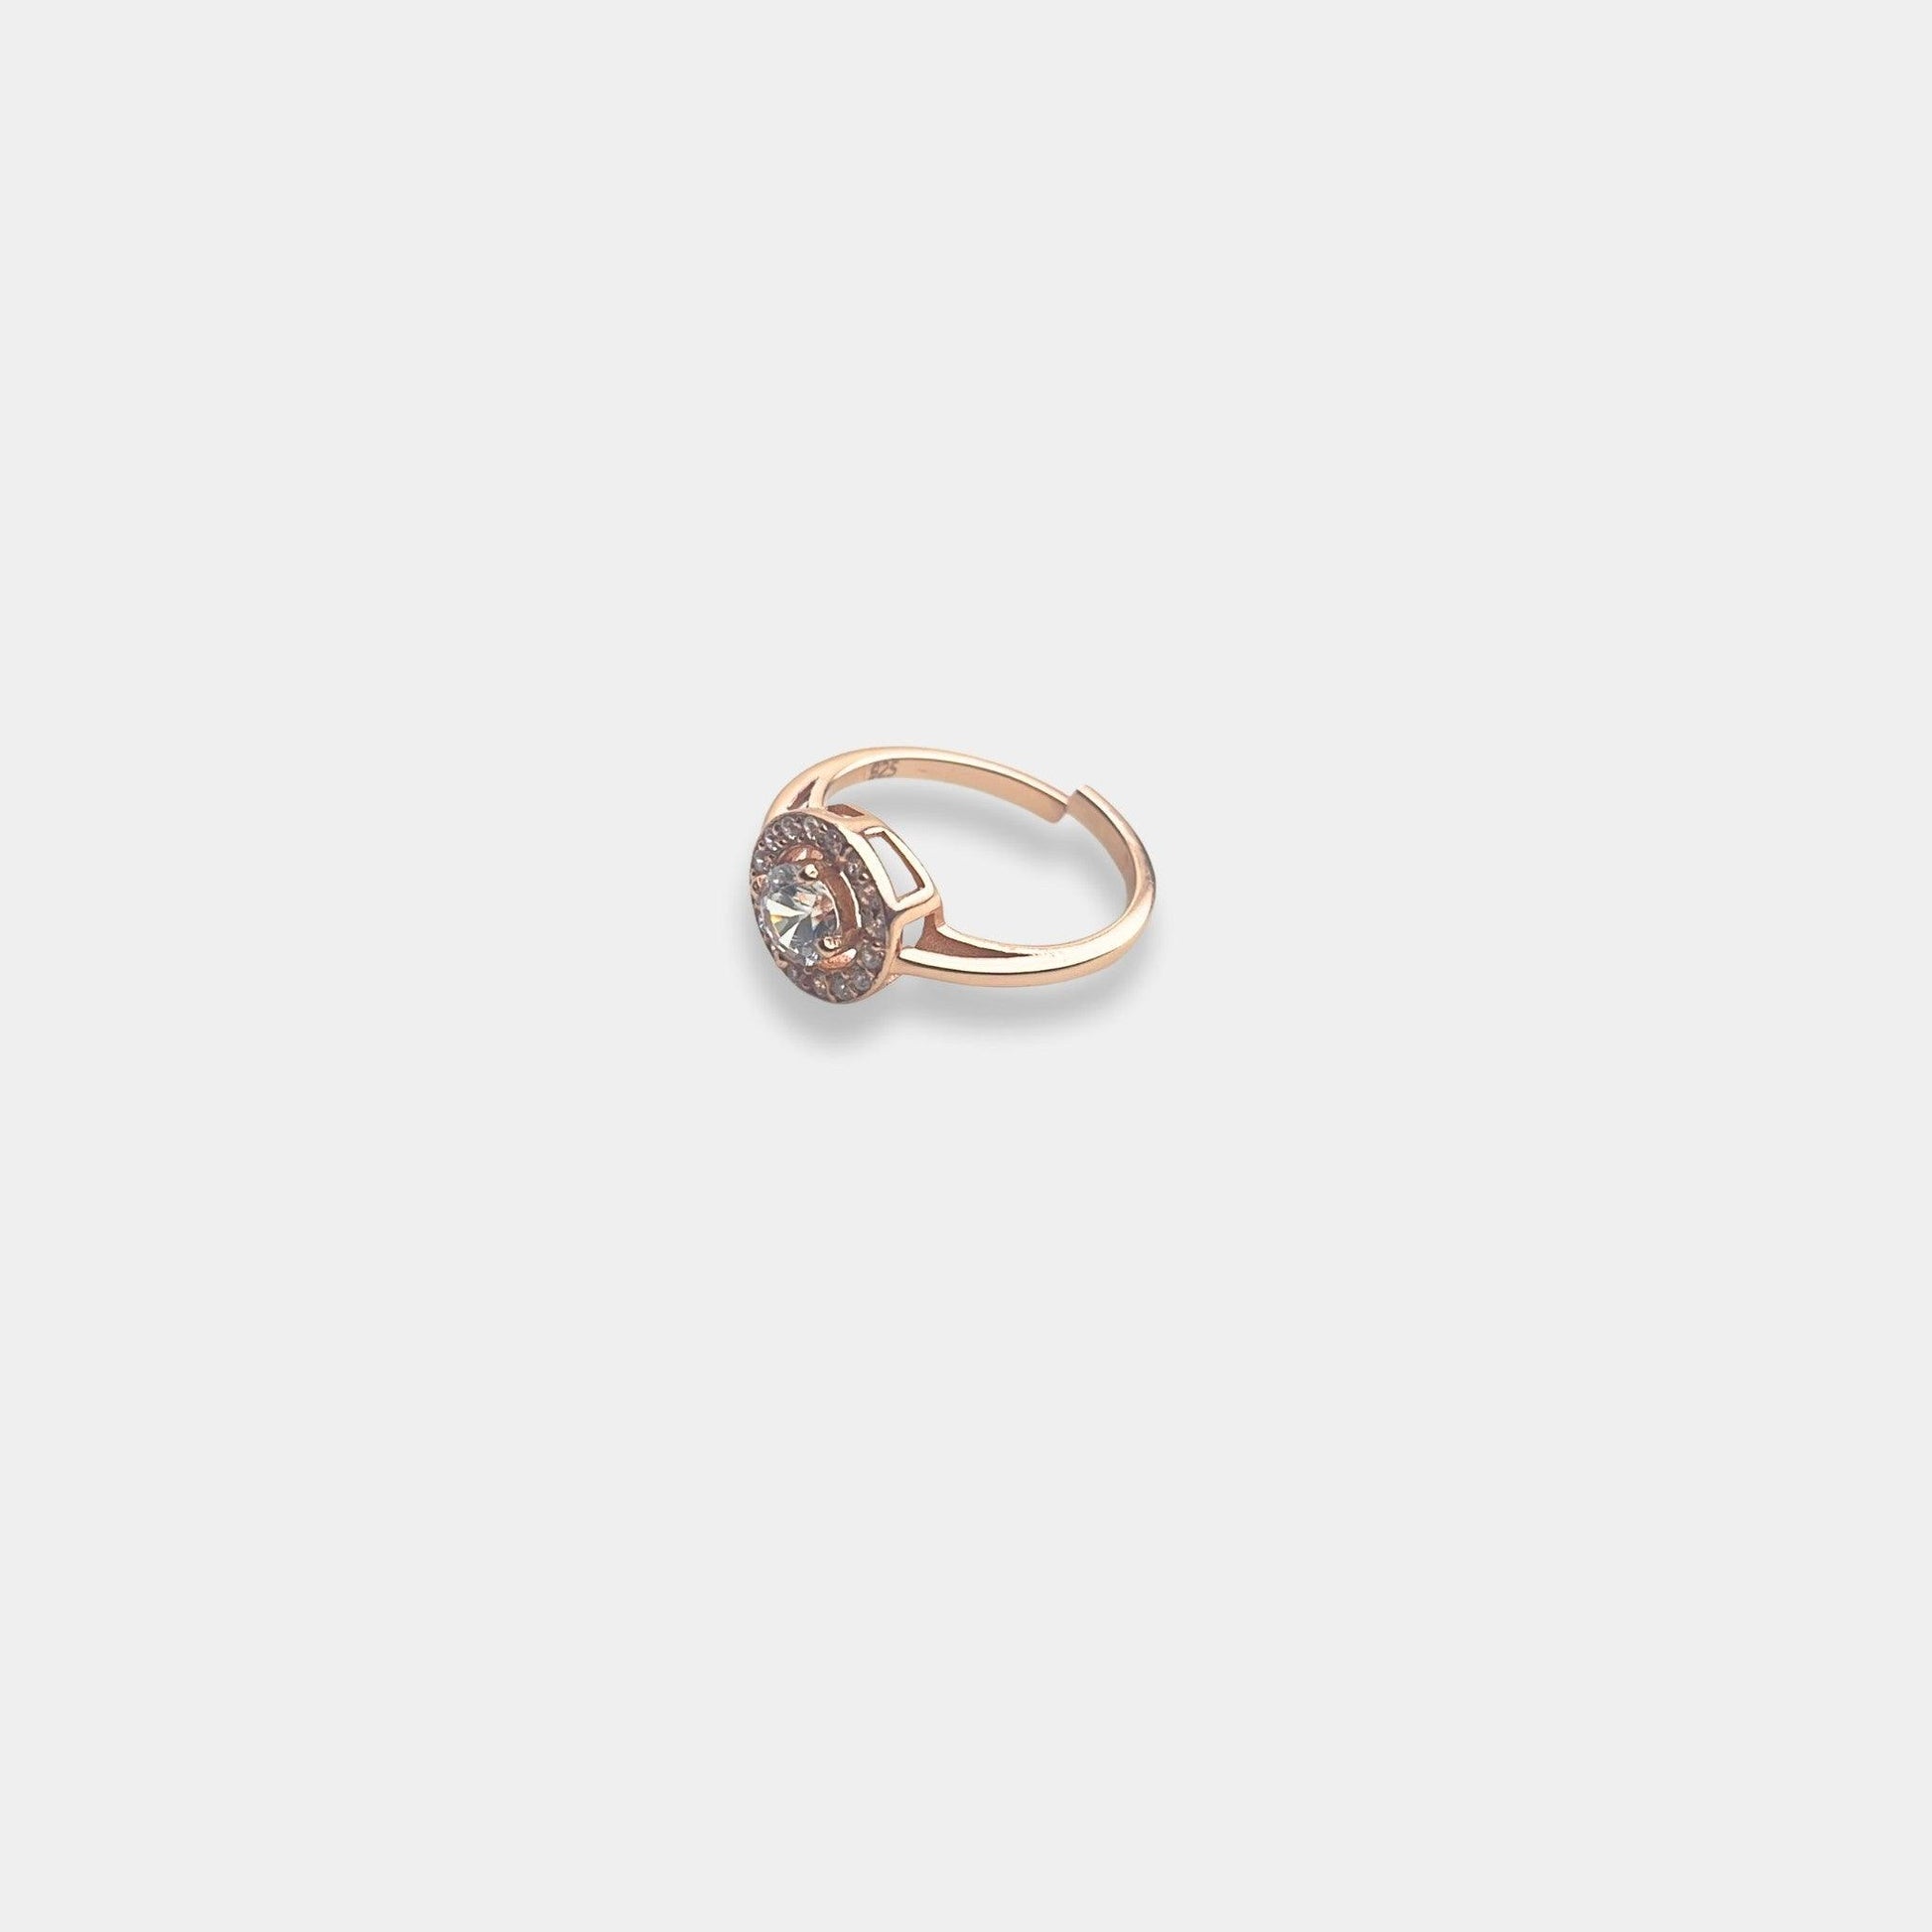 Discover the allure of a sterling silver ring, shining brightly against a pristine white background, exuding eternal elegance.